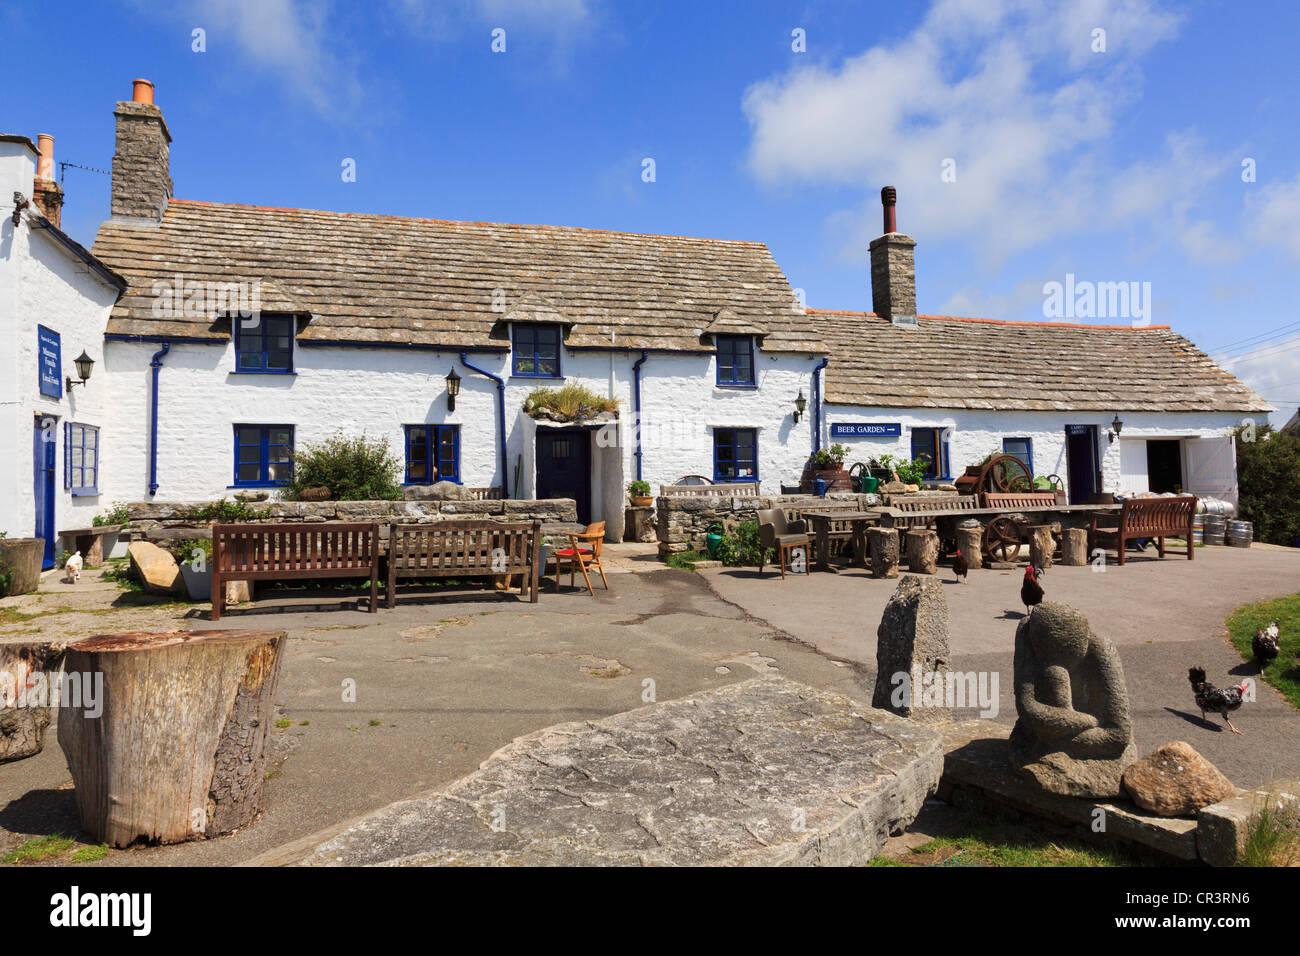 Traditional old Square and Compass country pub exterior in a Purbeck village of Worth Matravers Purbeck Dorset England UK Britain Stock Photo